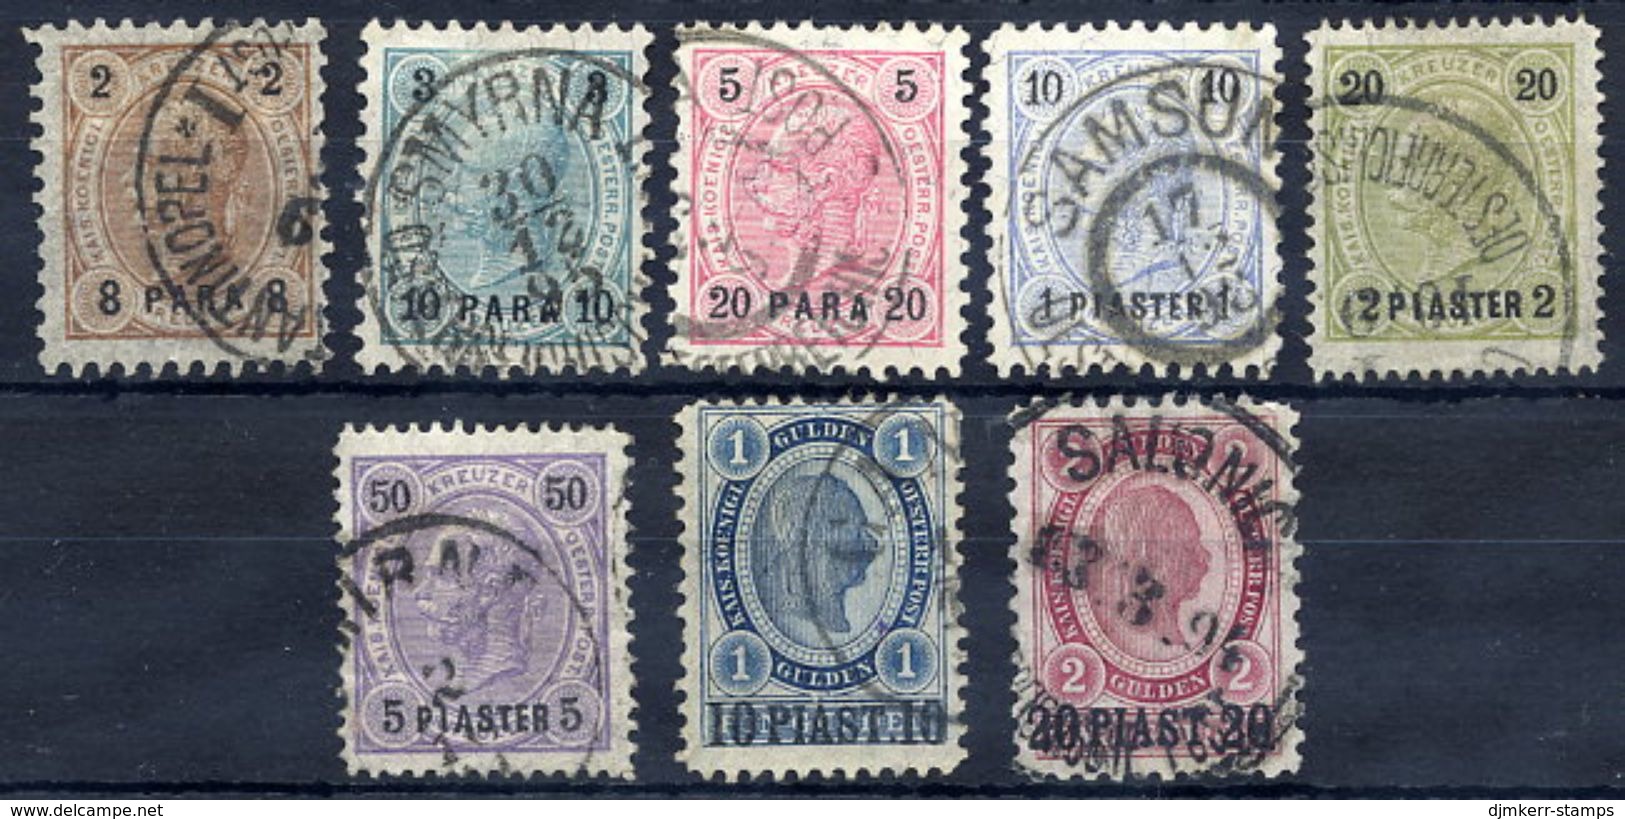 AUSTRIA PO In The LEVANT 1890-92 Surcharge Issues Used.  Michel 20-27 - Oostenrijkse Levant